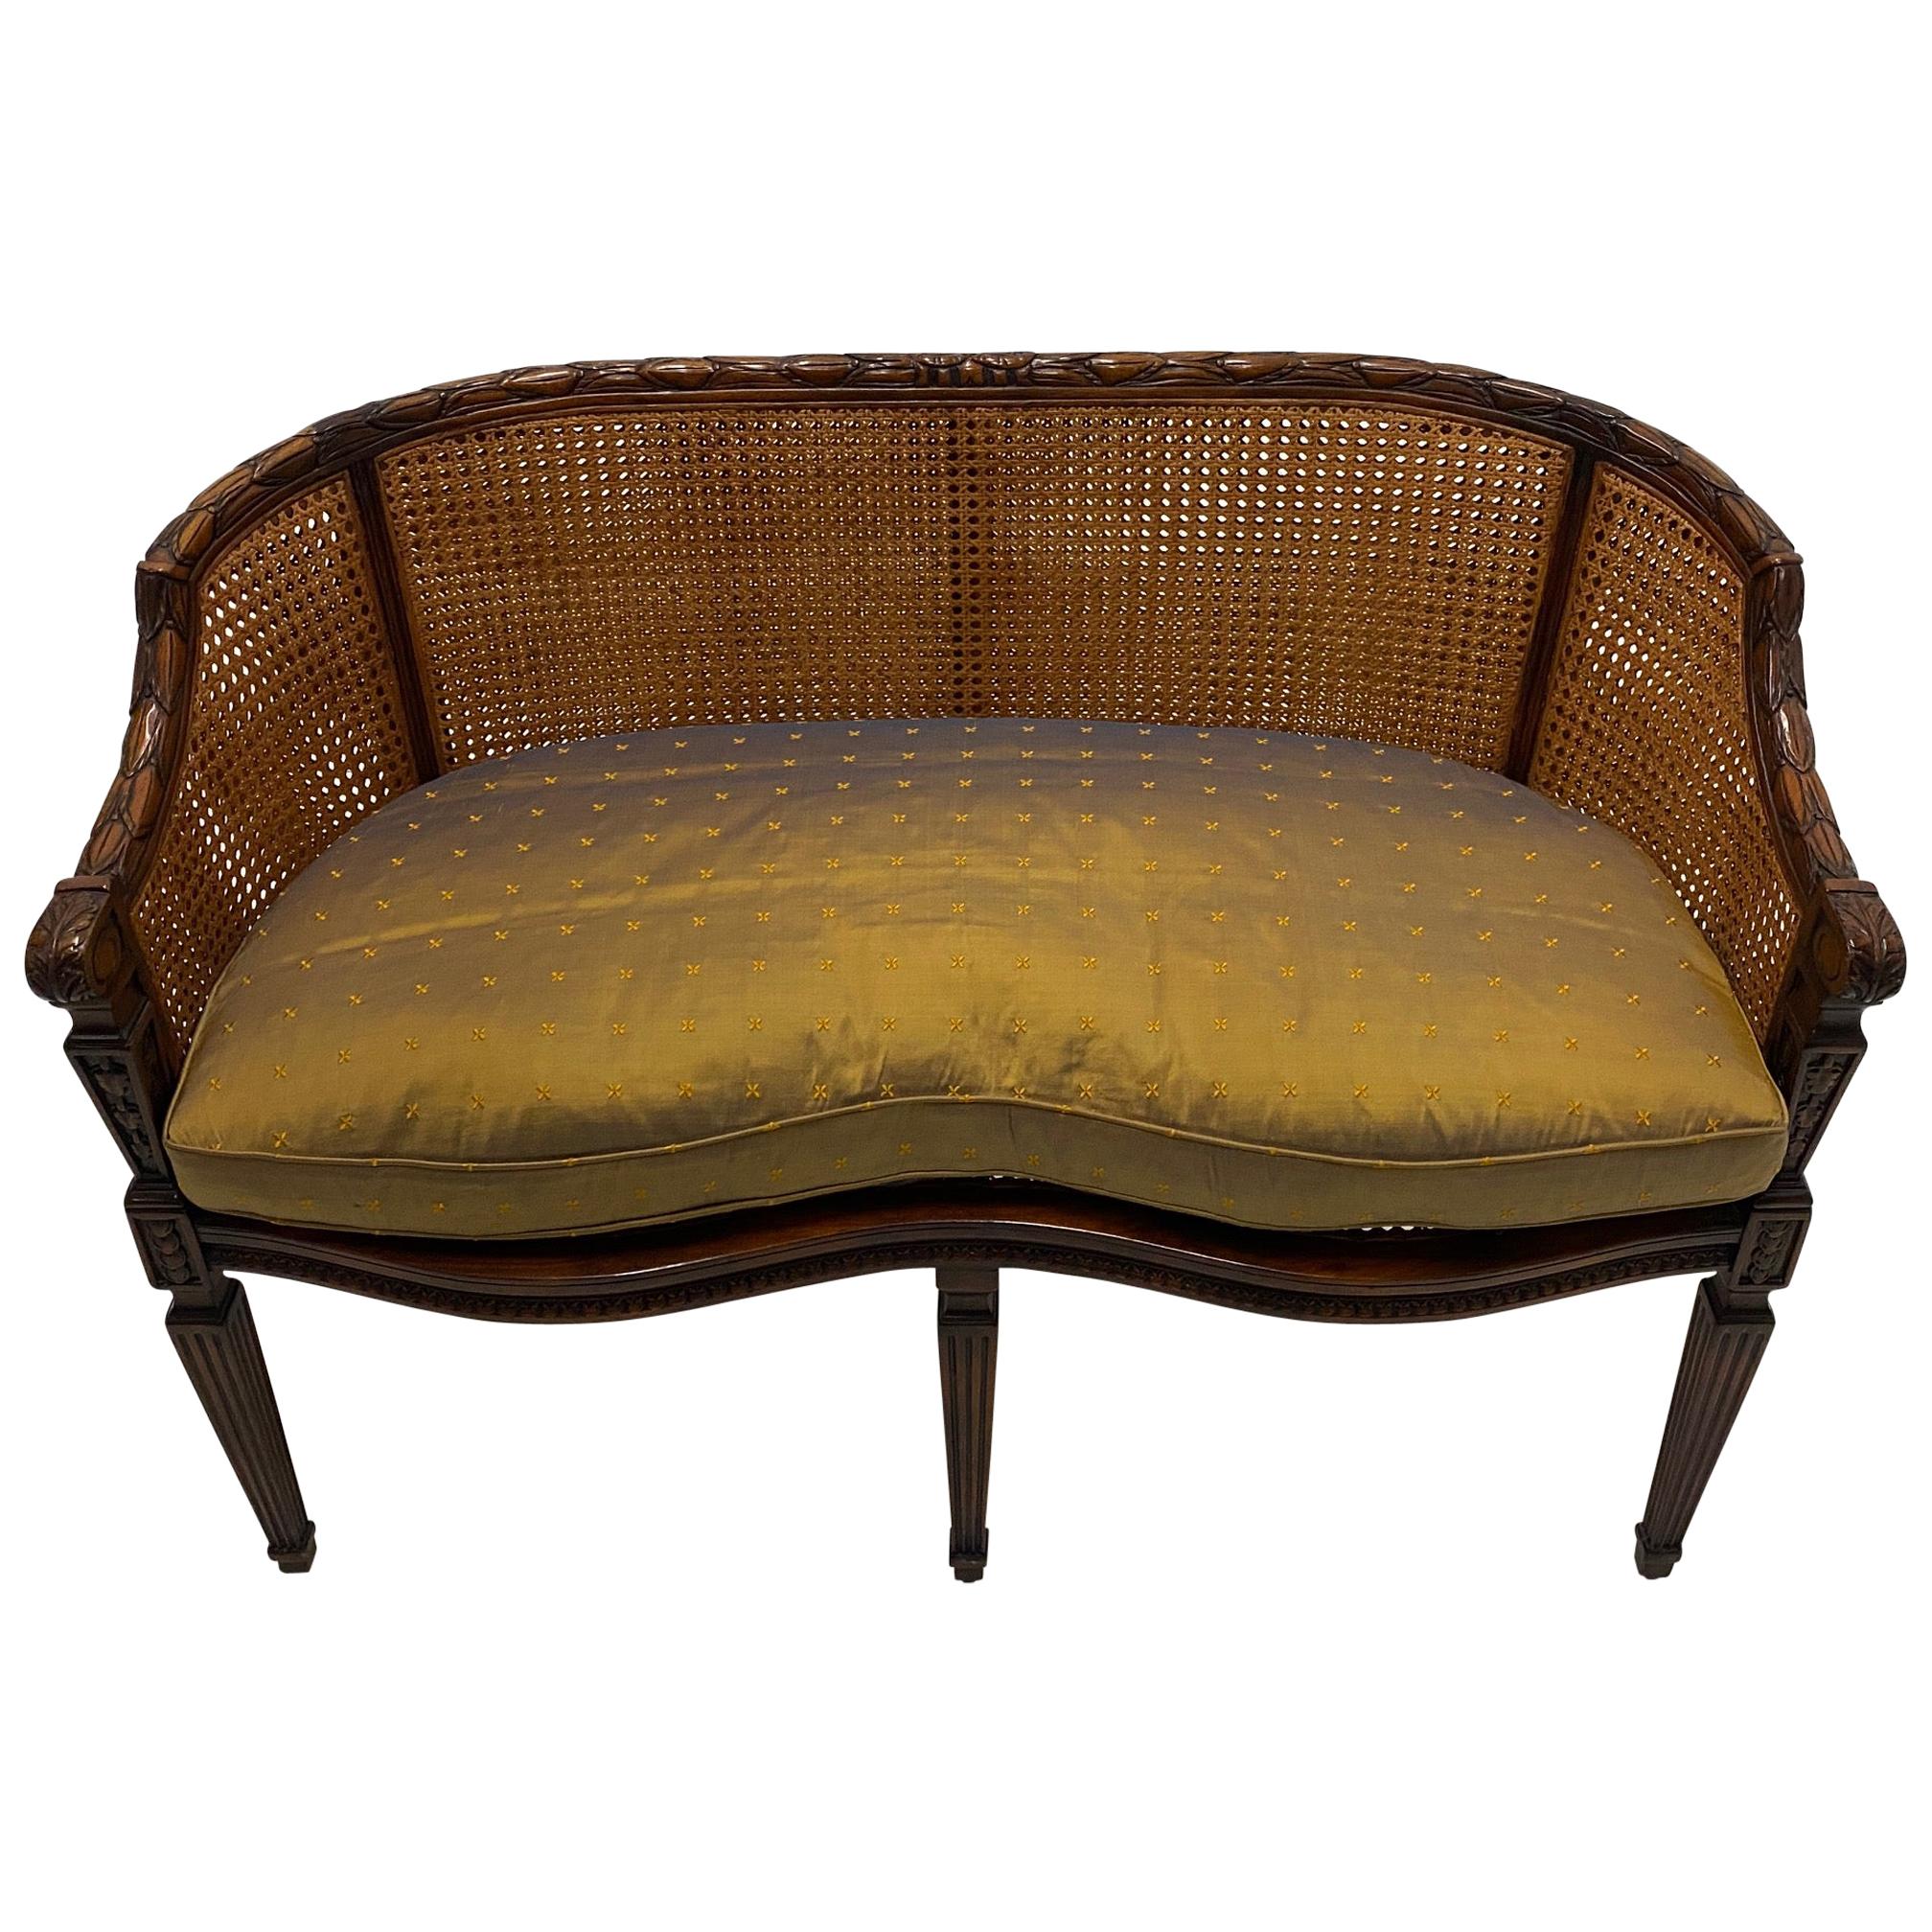 Elegant Hand Carved Mahogany & Caned Settee Loveseat with Silk Cushion